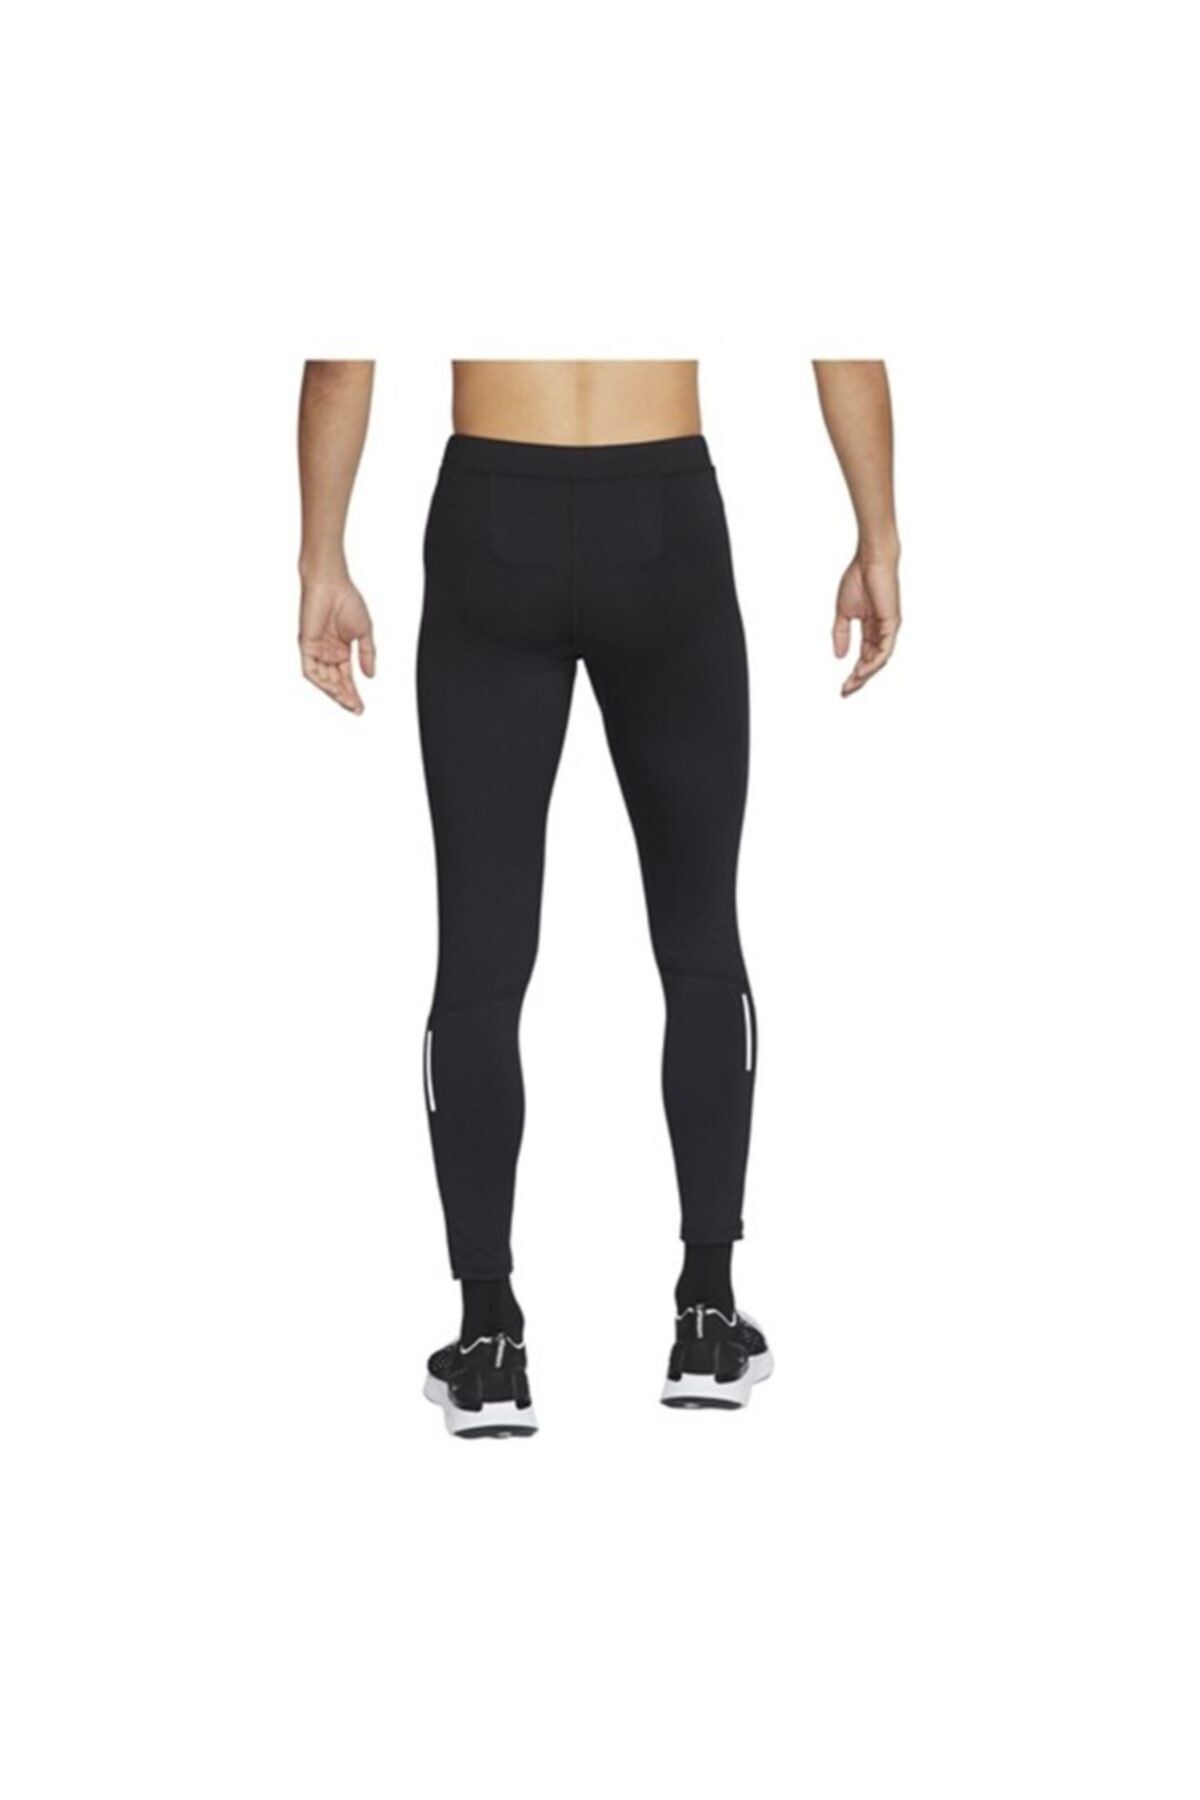 SteP MALL ONLINE SHOP / NIKE 2021 M NK CHLGR MOBILITY TIGHT ＜ブラック＞ (CZ8831- 010) 【23HO】